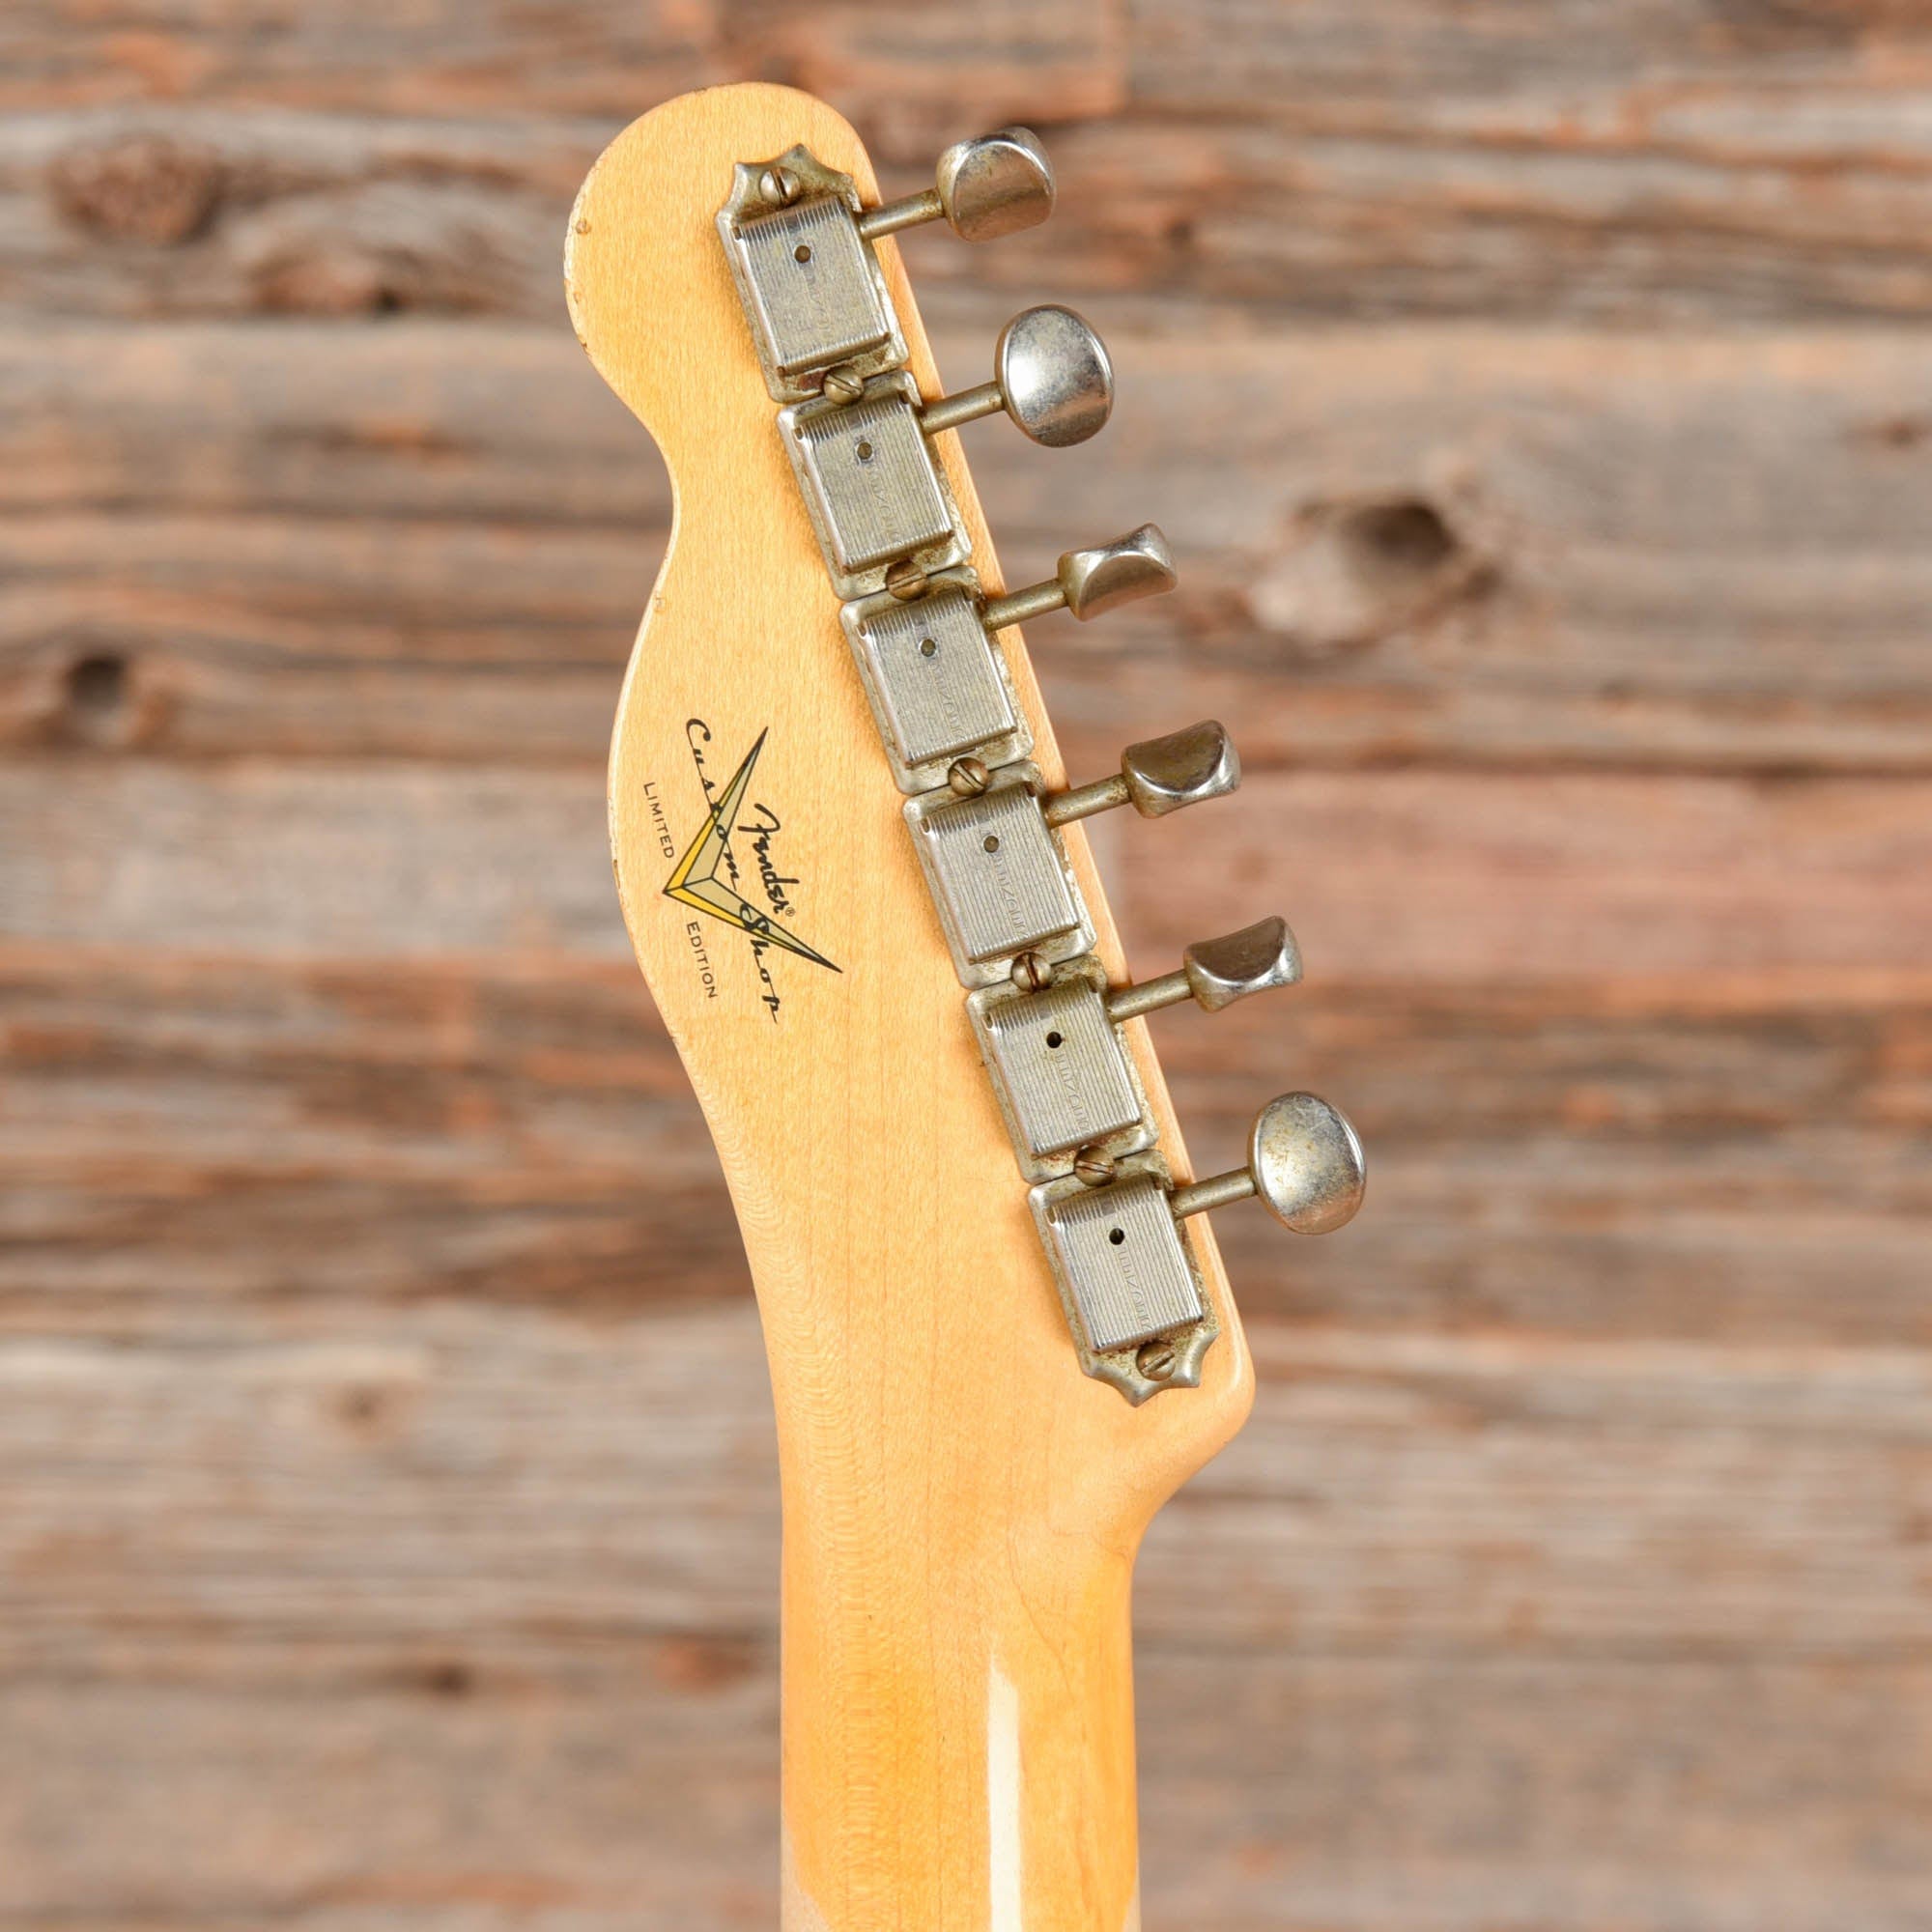 Fender Custom Shop Limited Roasted Pine Double Esquire Aged White Blonde 2021 Electric Guitars / Solid Body